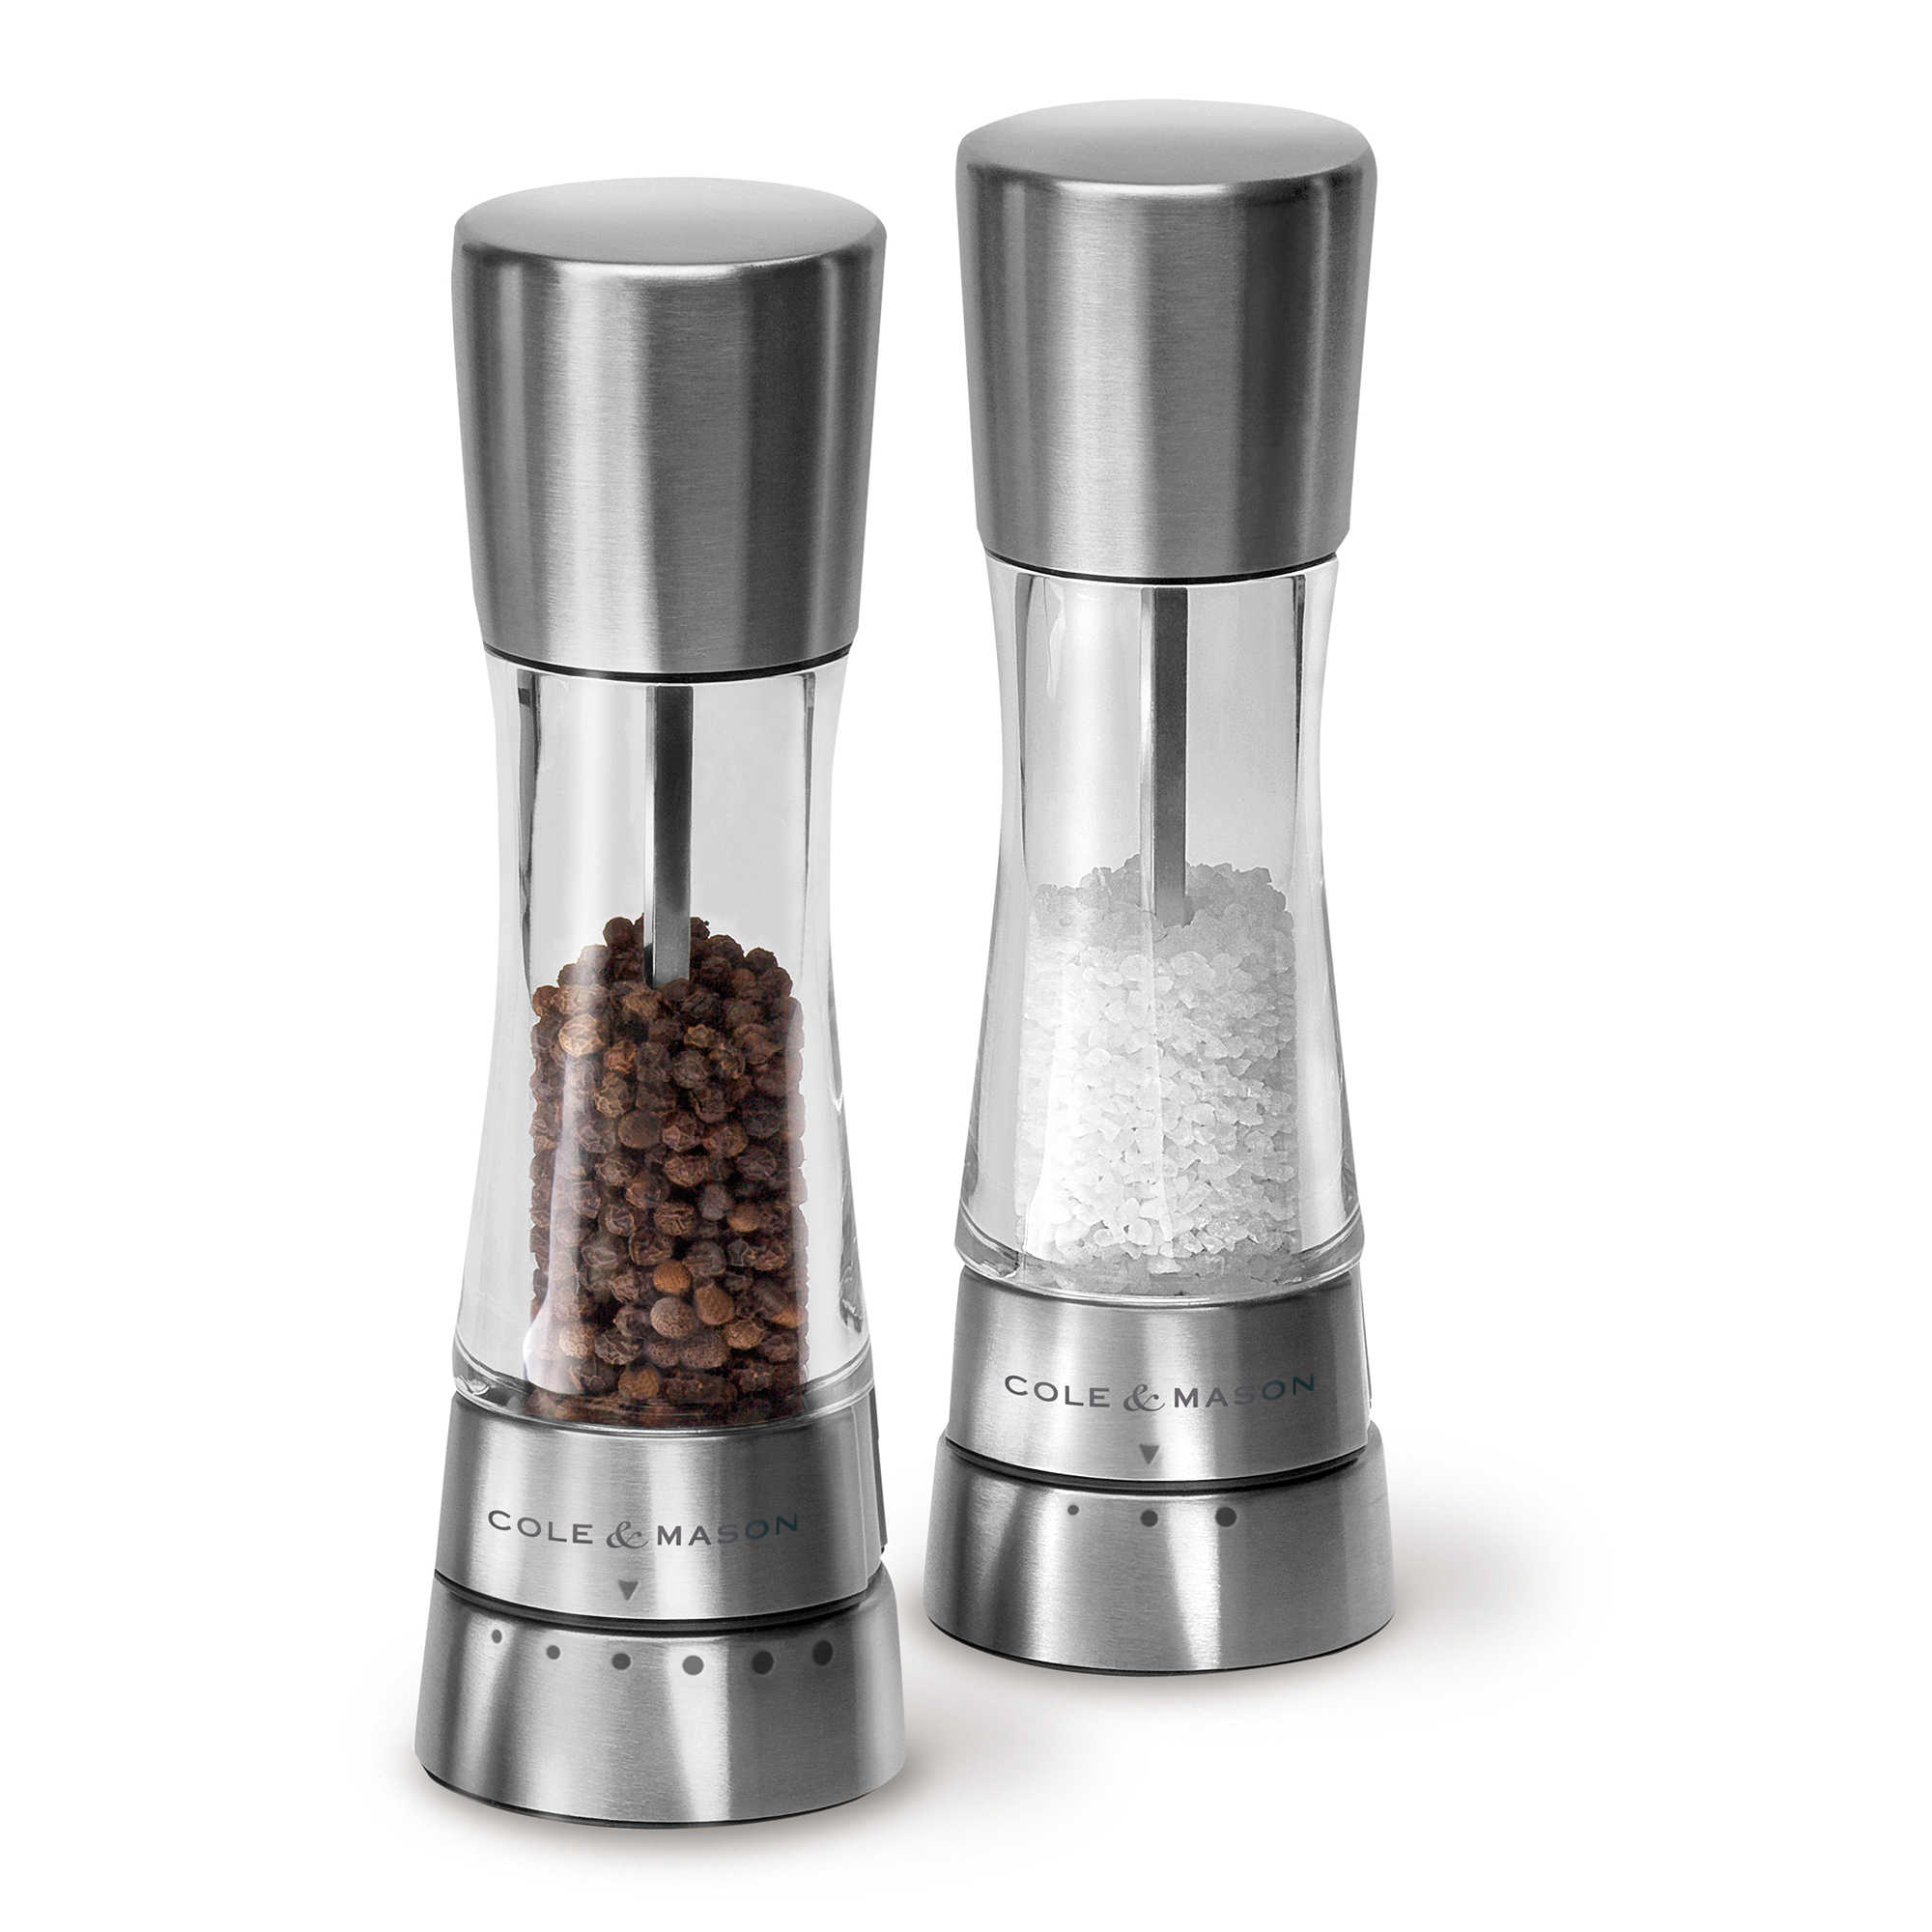 Derwent Salt and Pepper Mill | Cole and Mason USA – Gift Set